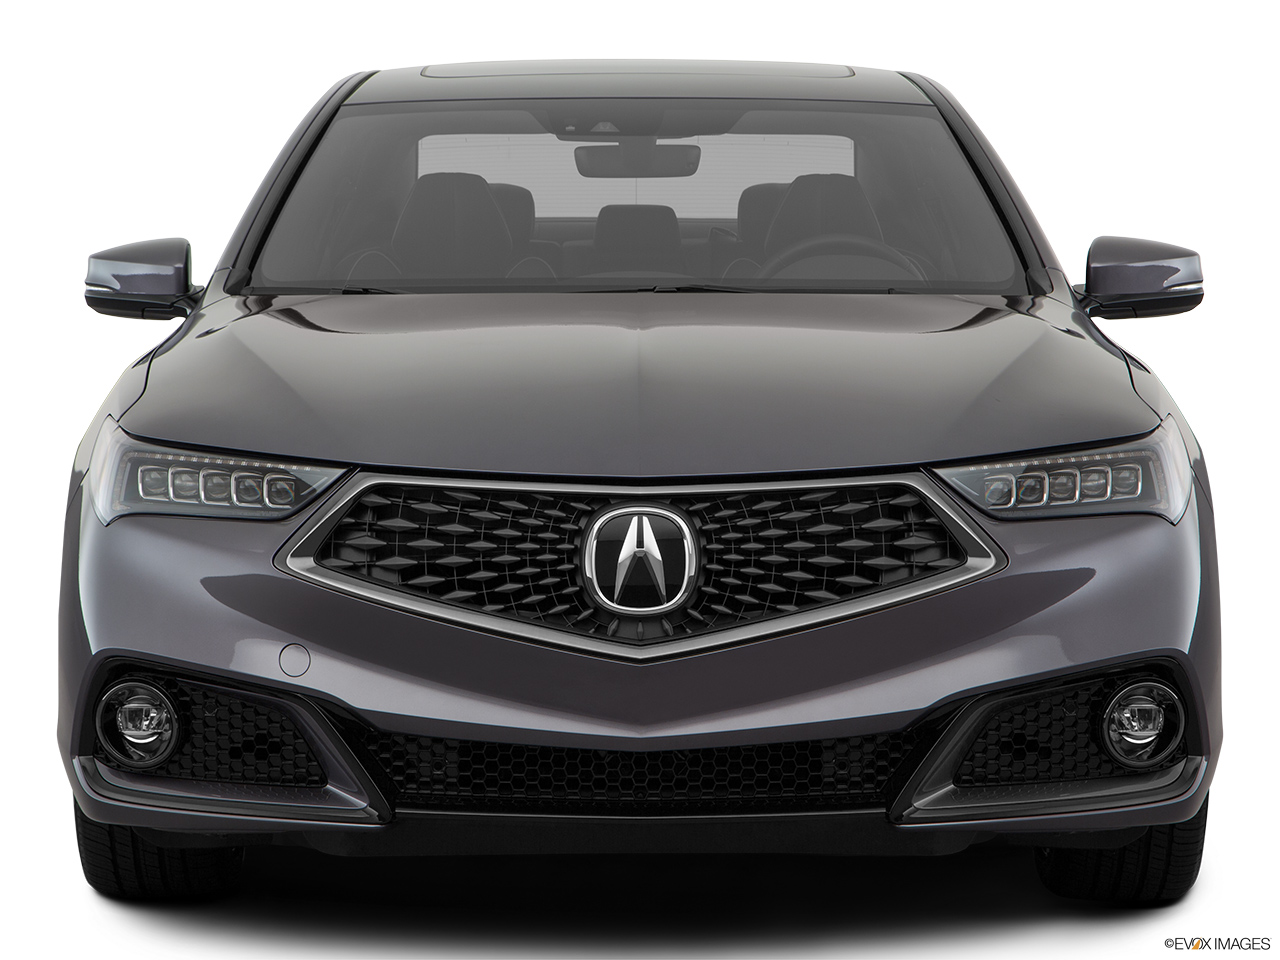 2020 Acura TLX 3.5L Low/wide front. 